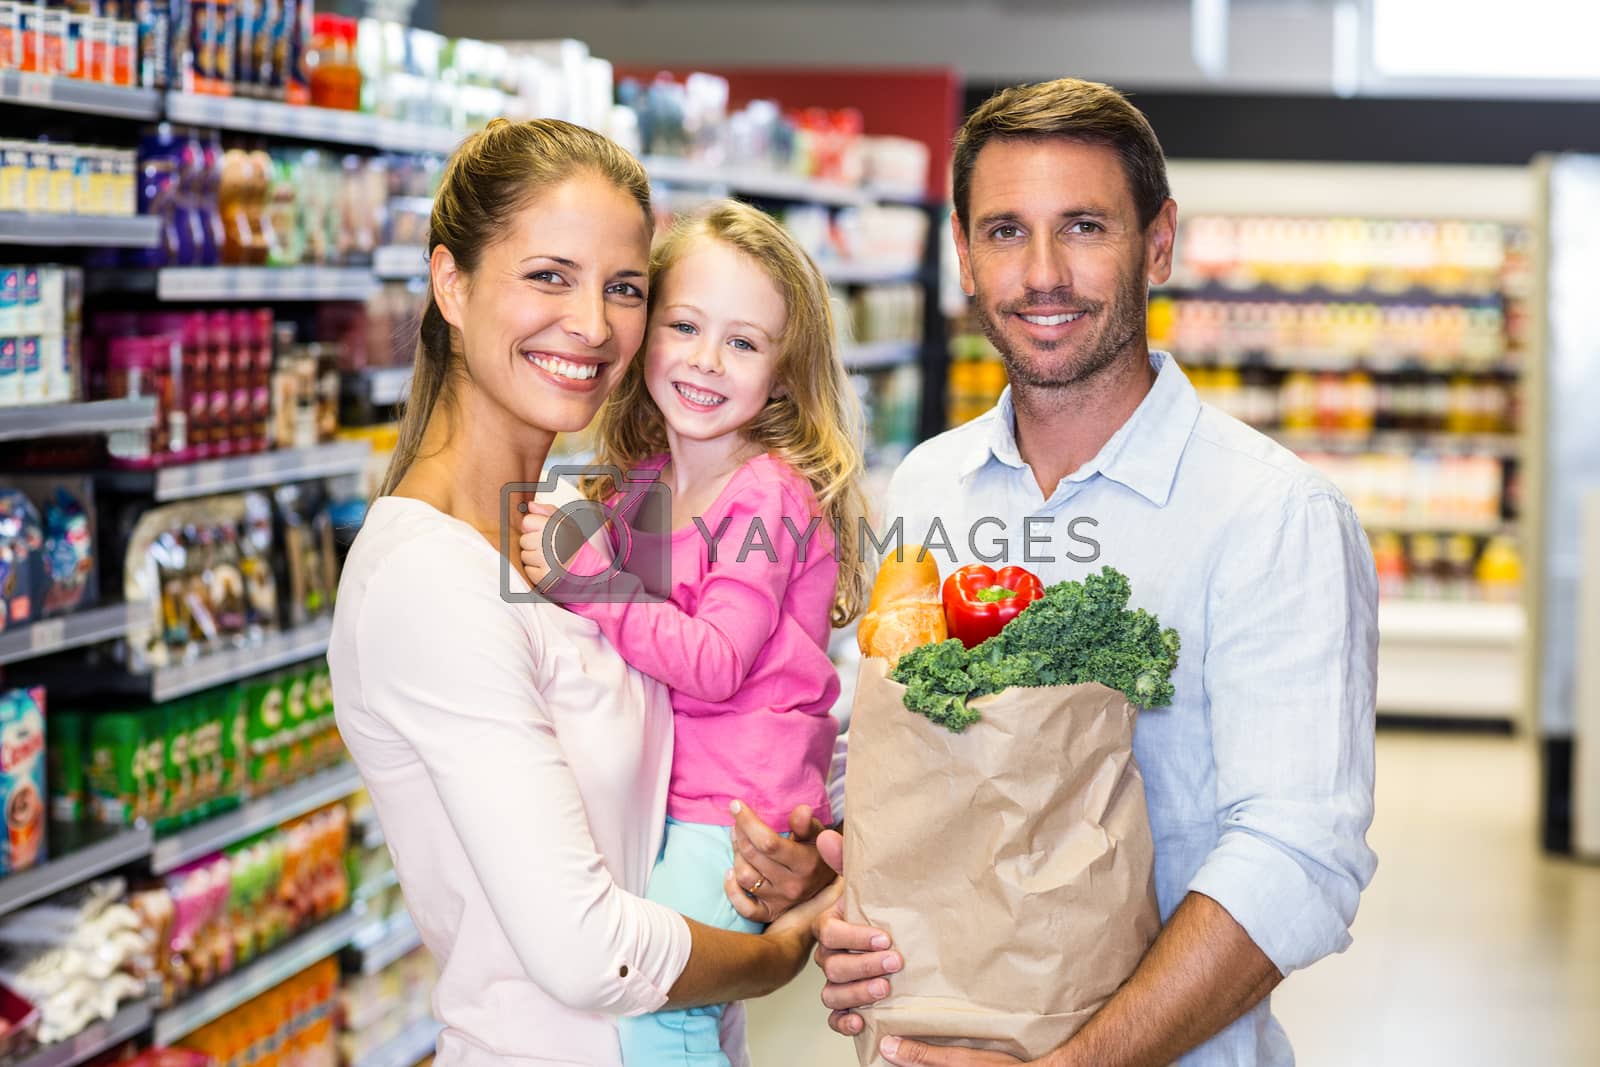 Royalty free image of Smiling family with grocery bag at the supermarket by Wavebreakmedia